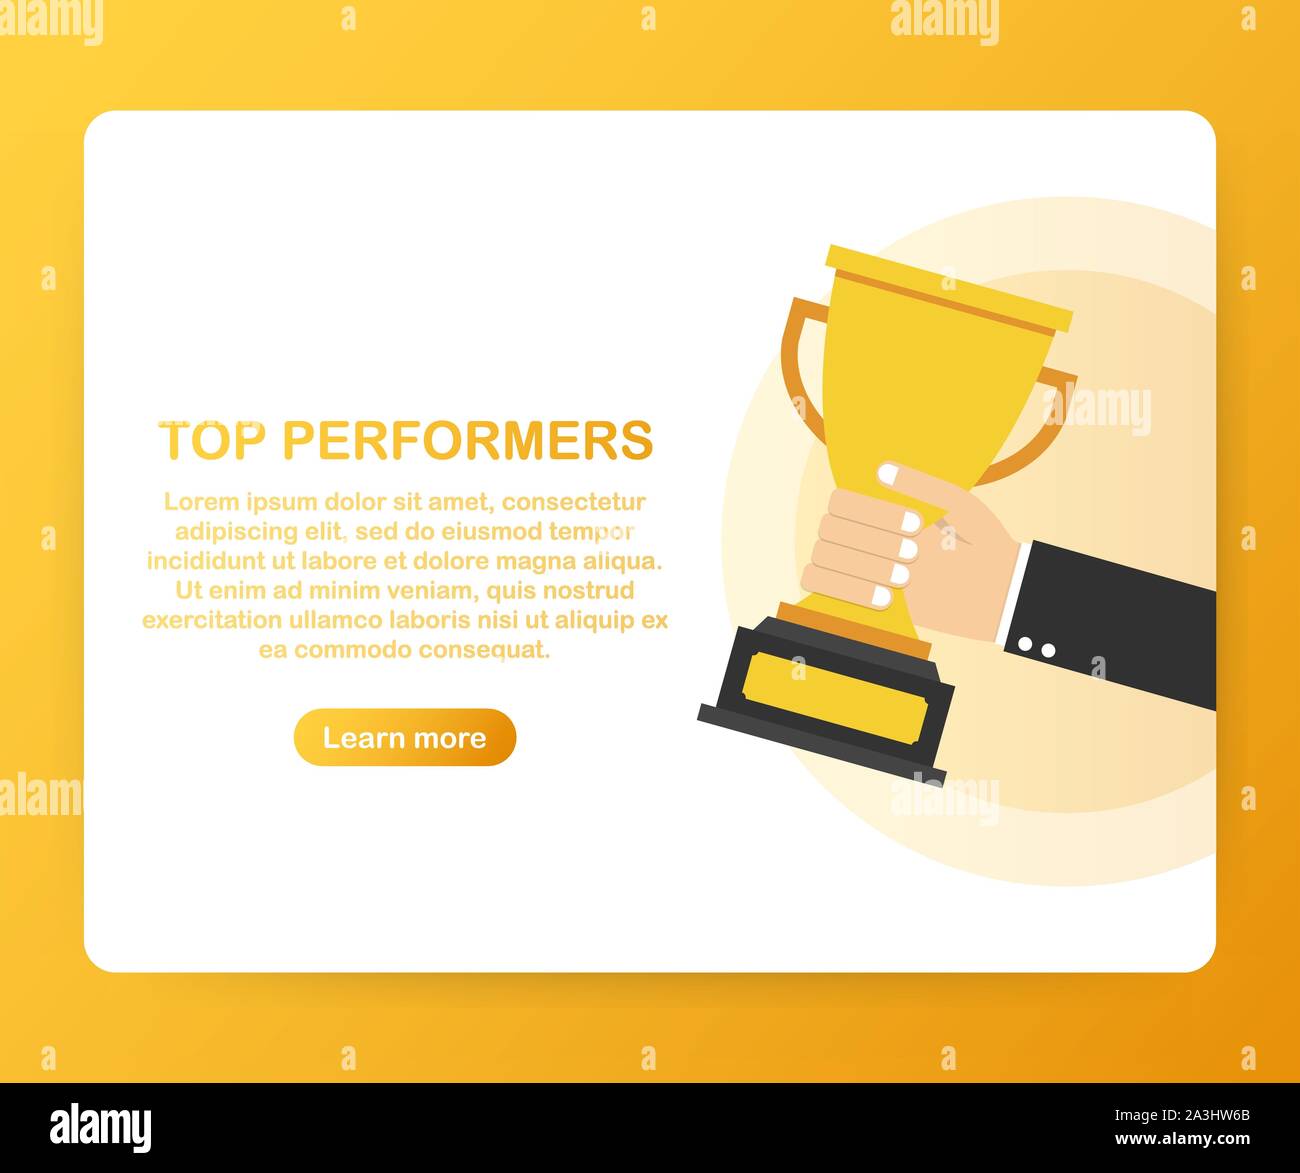 Top Performers. Website template designs. Vector illustration concepts for website and mobile website design and development. Vector stock illustratio Stock Vector